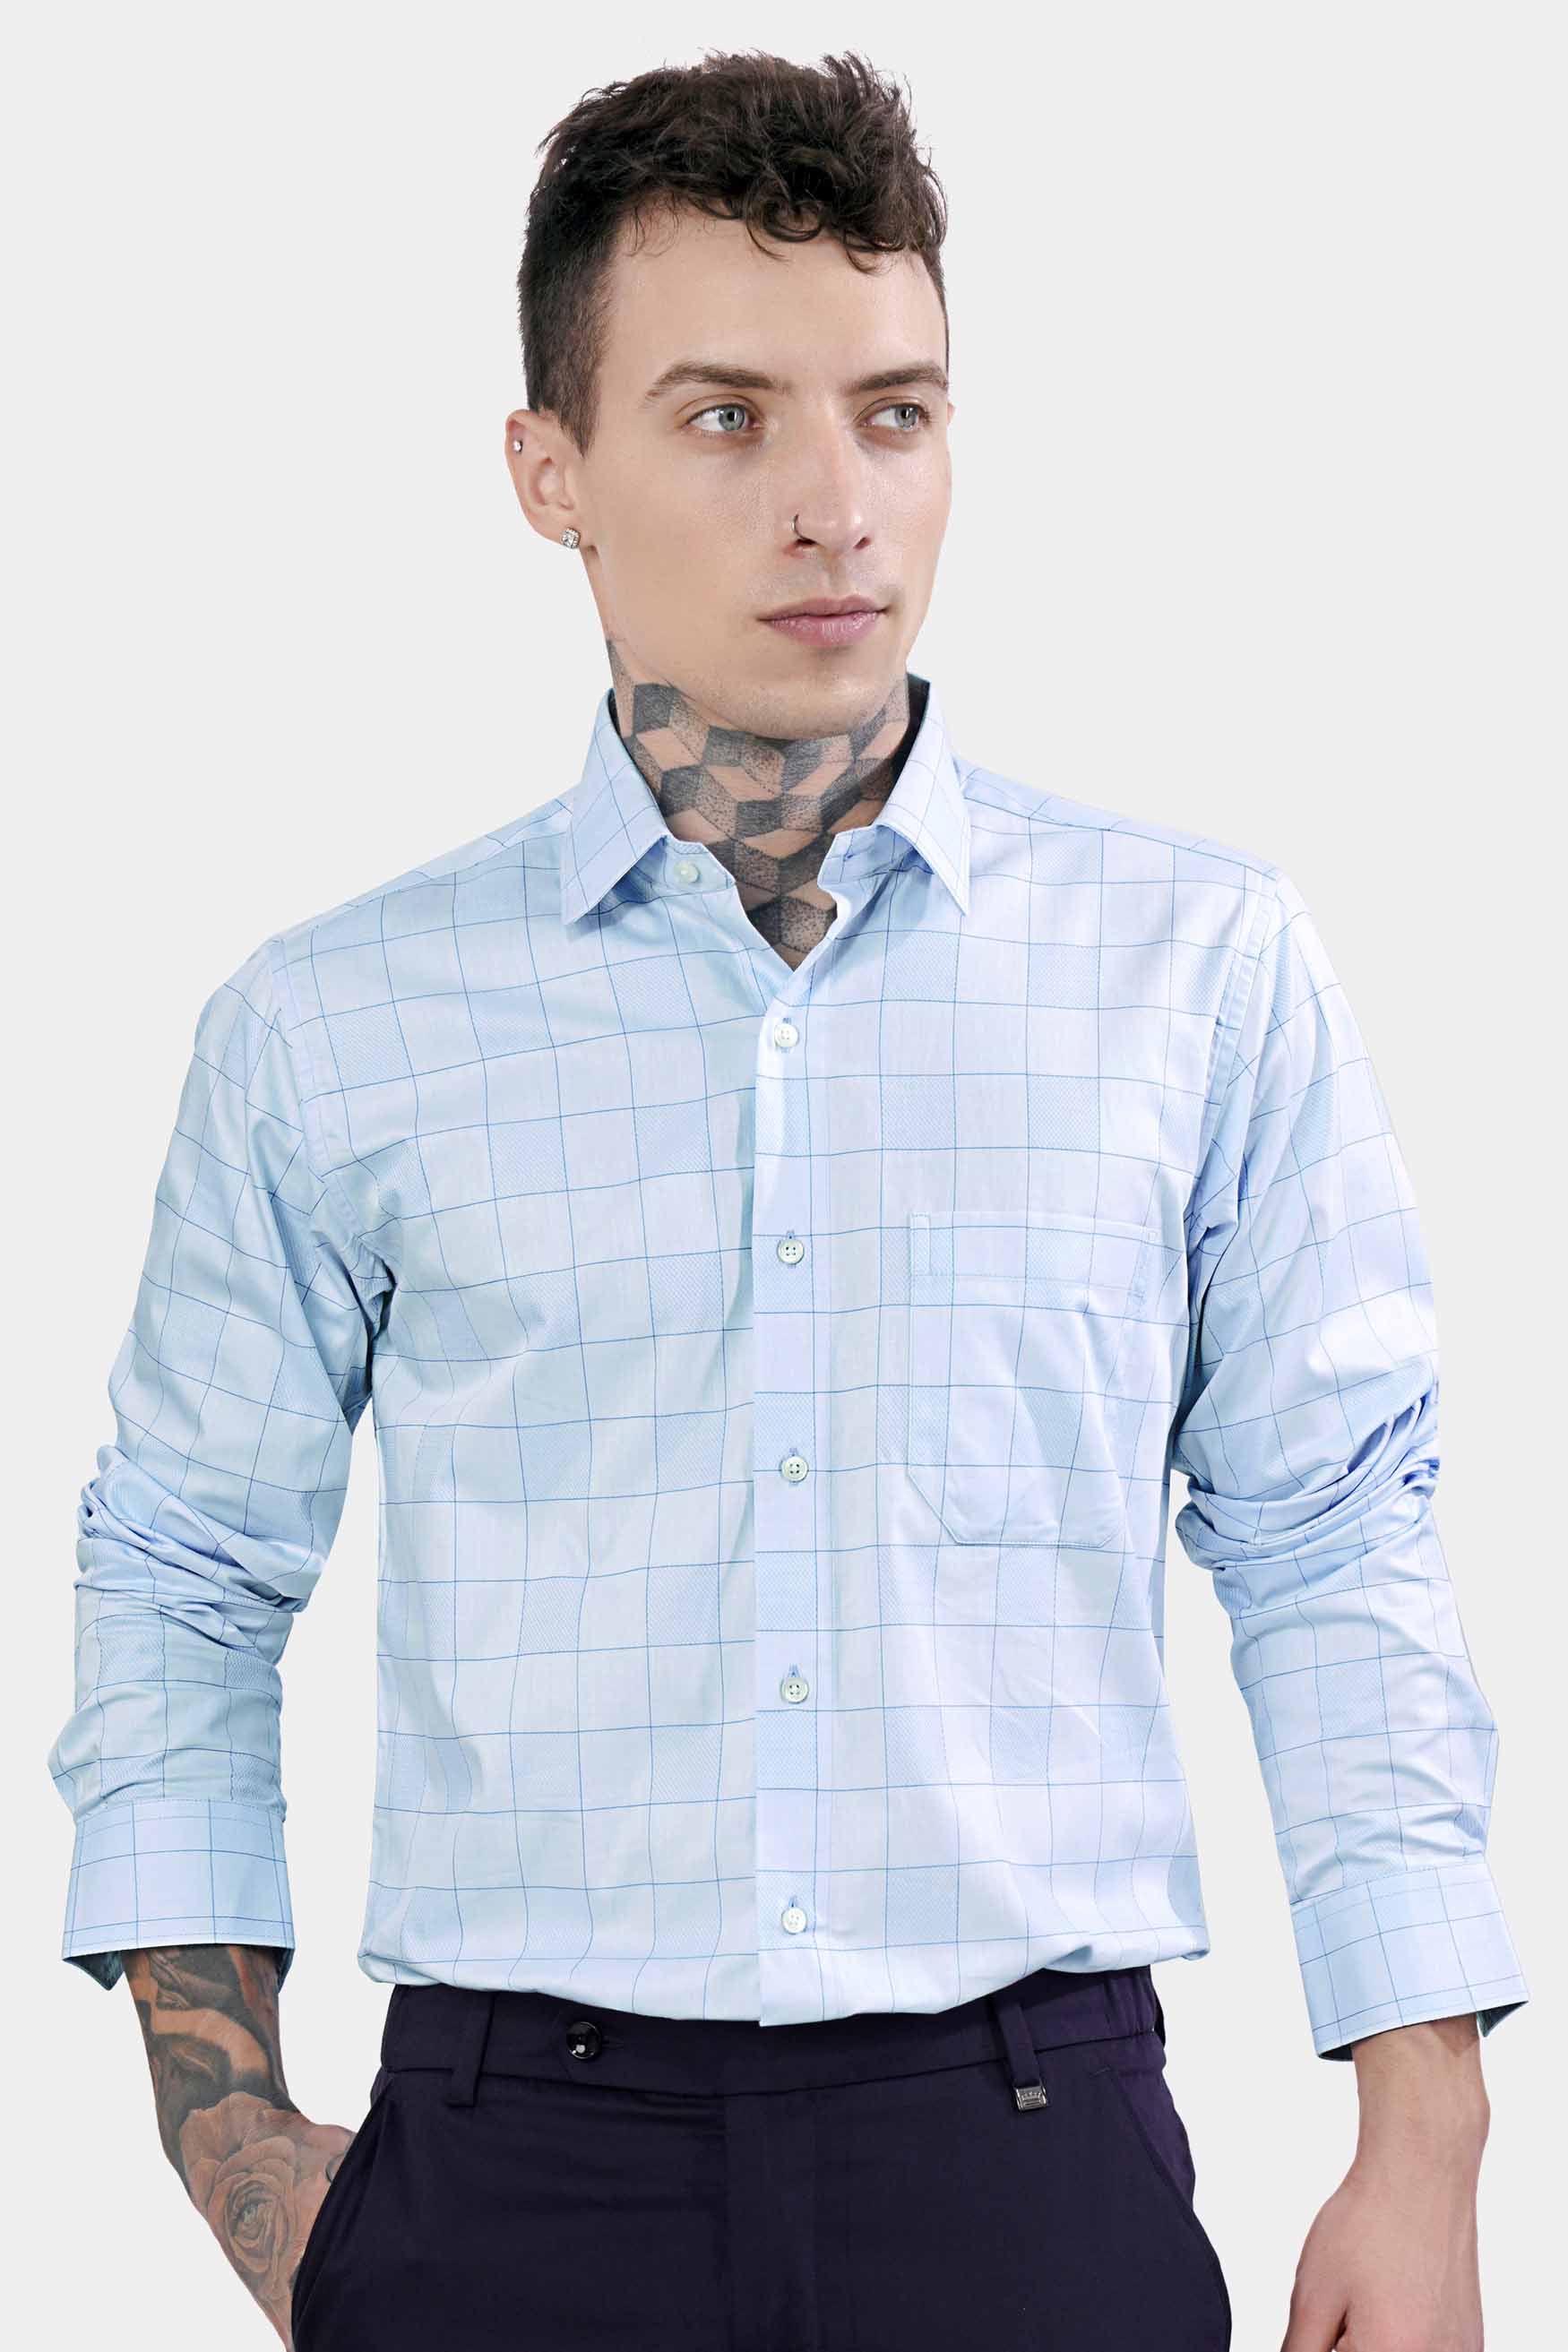 Mercury and Electric Blue Checkered Dobby Textured Premium Giza Cotton Shirt 11463-38, 11463-H-38, 11463-39, 11463-H-39, 11463-40, 11463-H-40, 11463-42, 11463-H-42, 11463-44, 11463-H-44, 11463-46, 11463-H-46, 11463-48, 11463-H-48, 11463-50, 11463-H-50, 11463-52, 11463-H-52